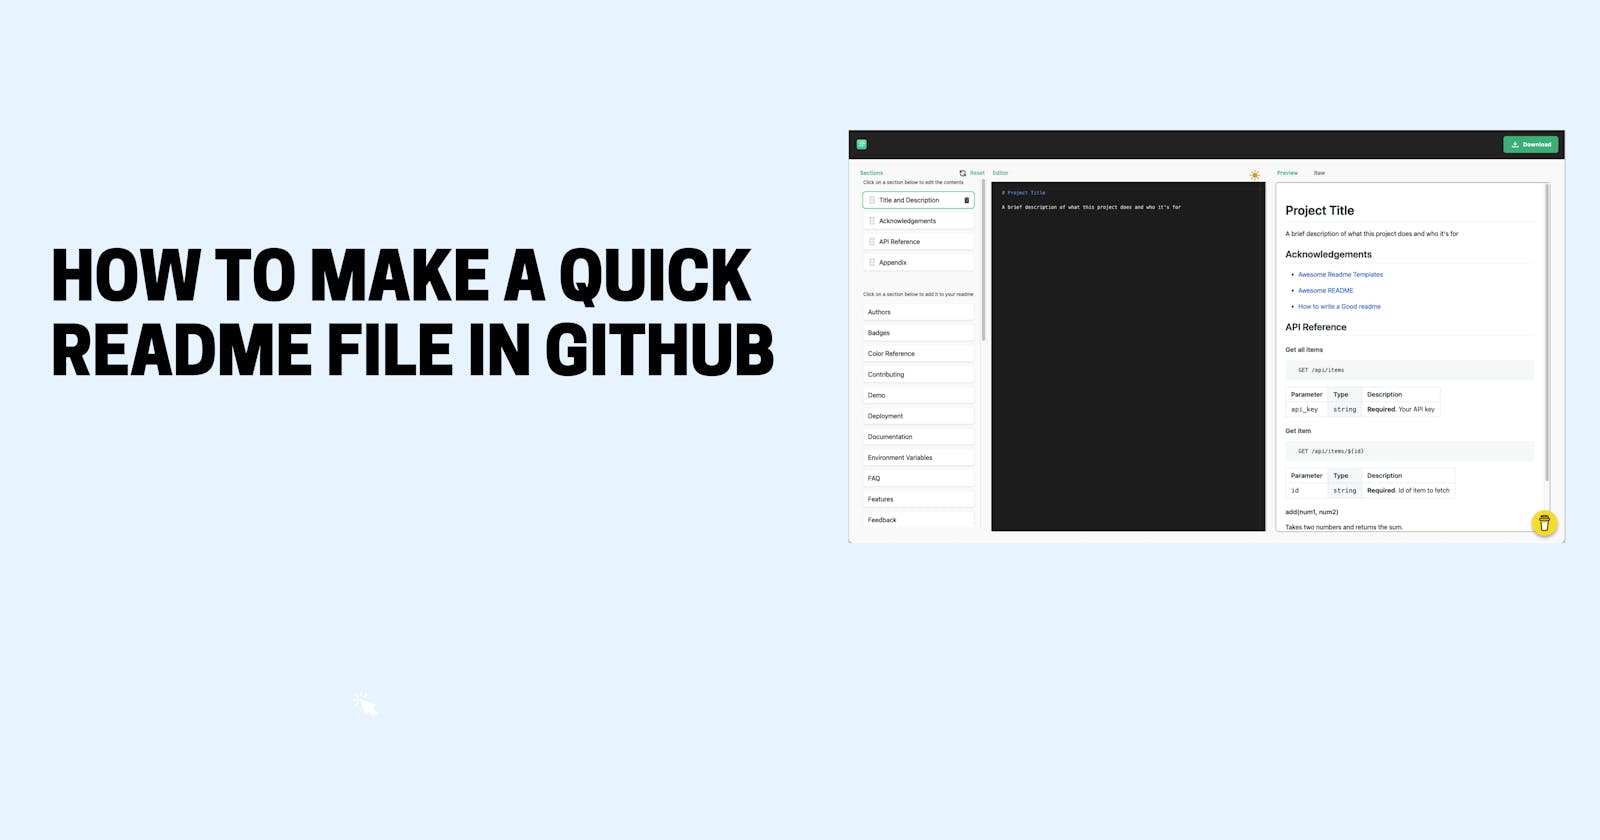 How To Make a Quick Readme File in GitHub